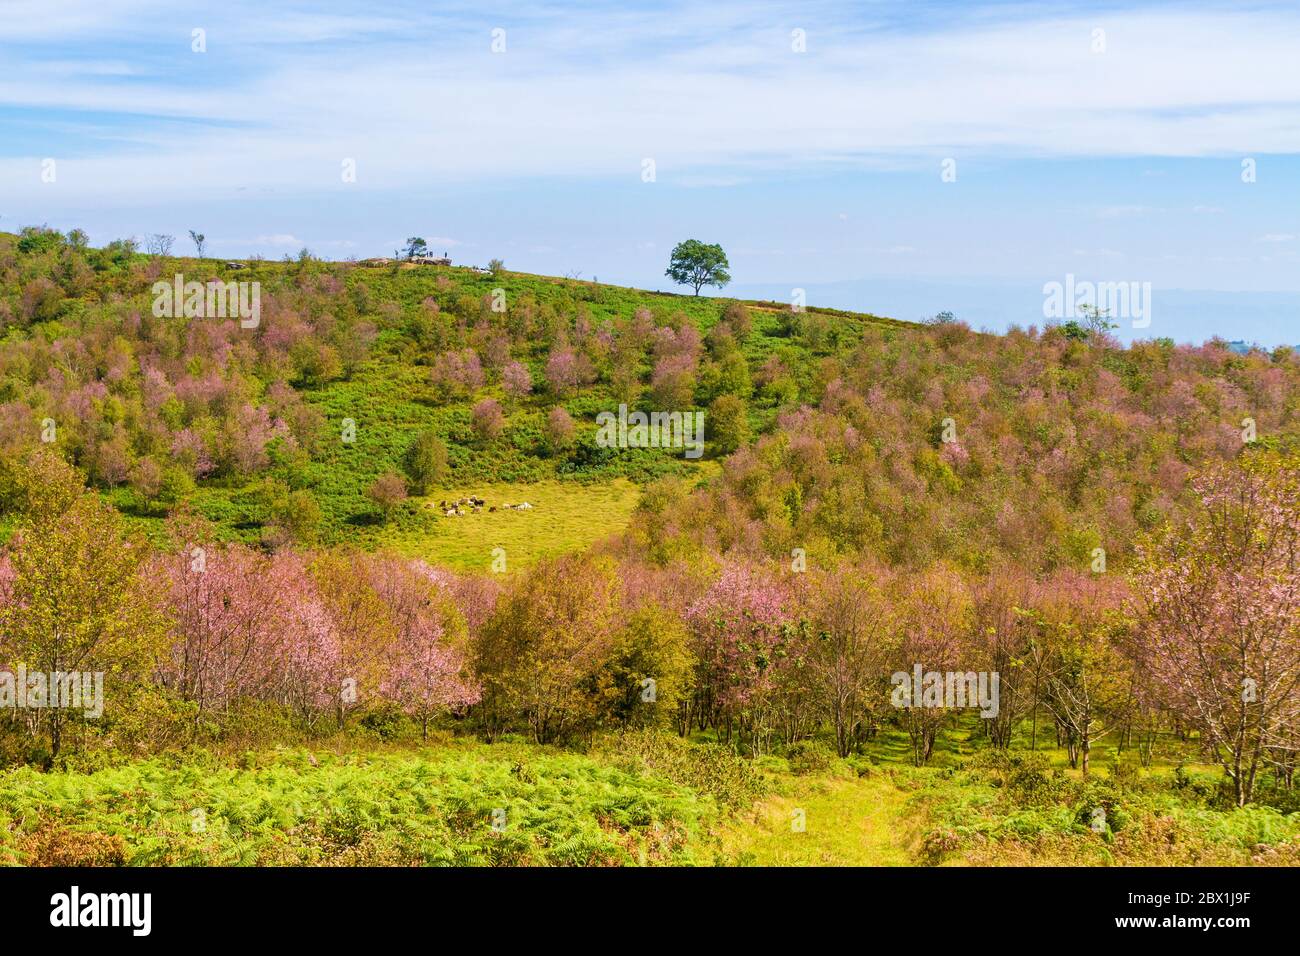 Cherry blossoms are blooming on the mountain in Phu Lom Lo, Phitsanulok Province, Thailand. Stock Photo